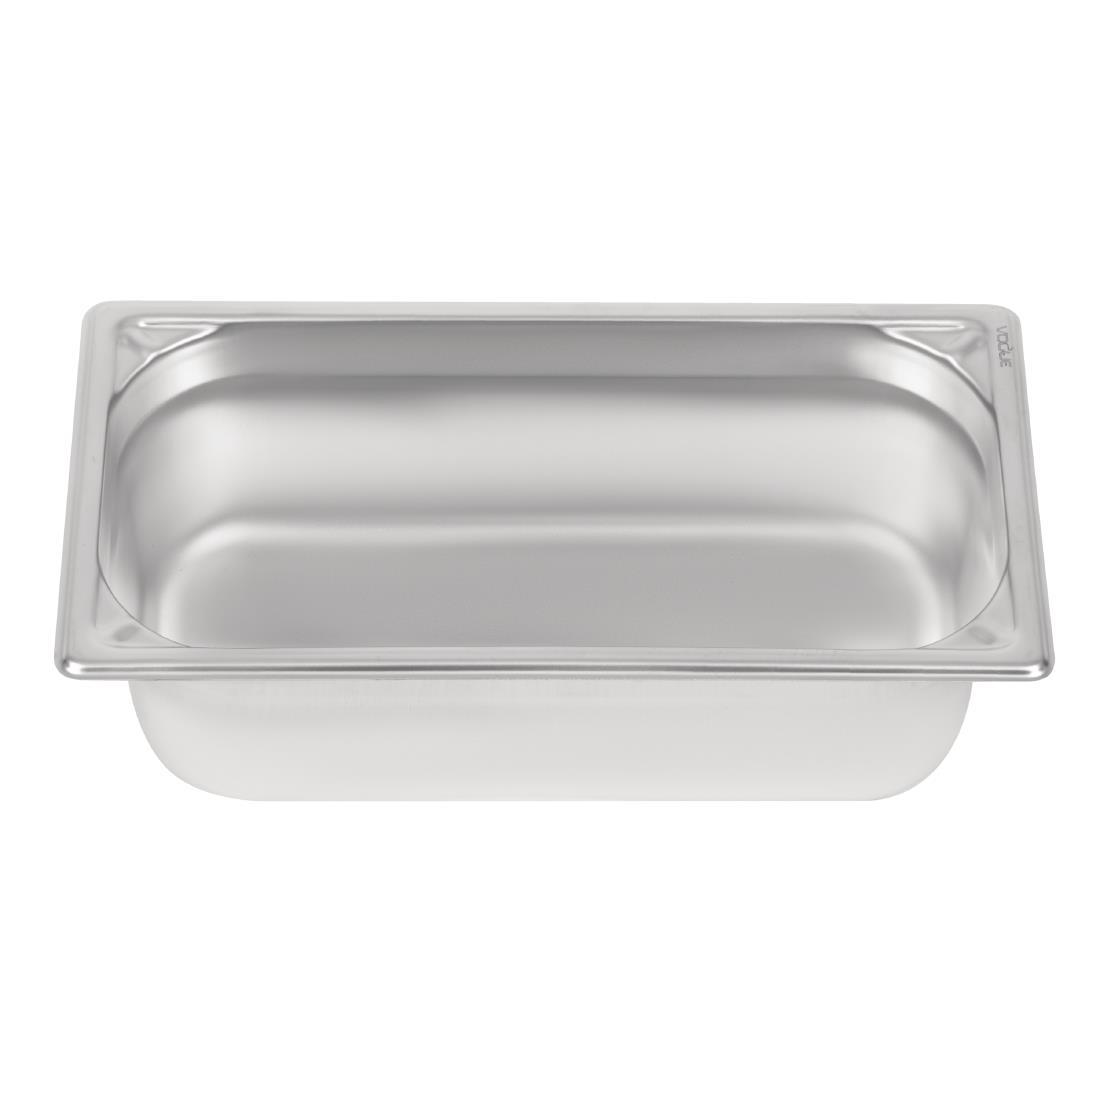 Vogue Heavy Duty Stainless Steel 1/3 Gastronorm Pan 100mm - DW443  - 3